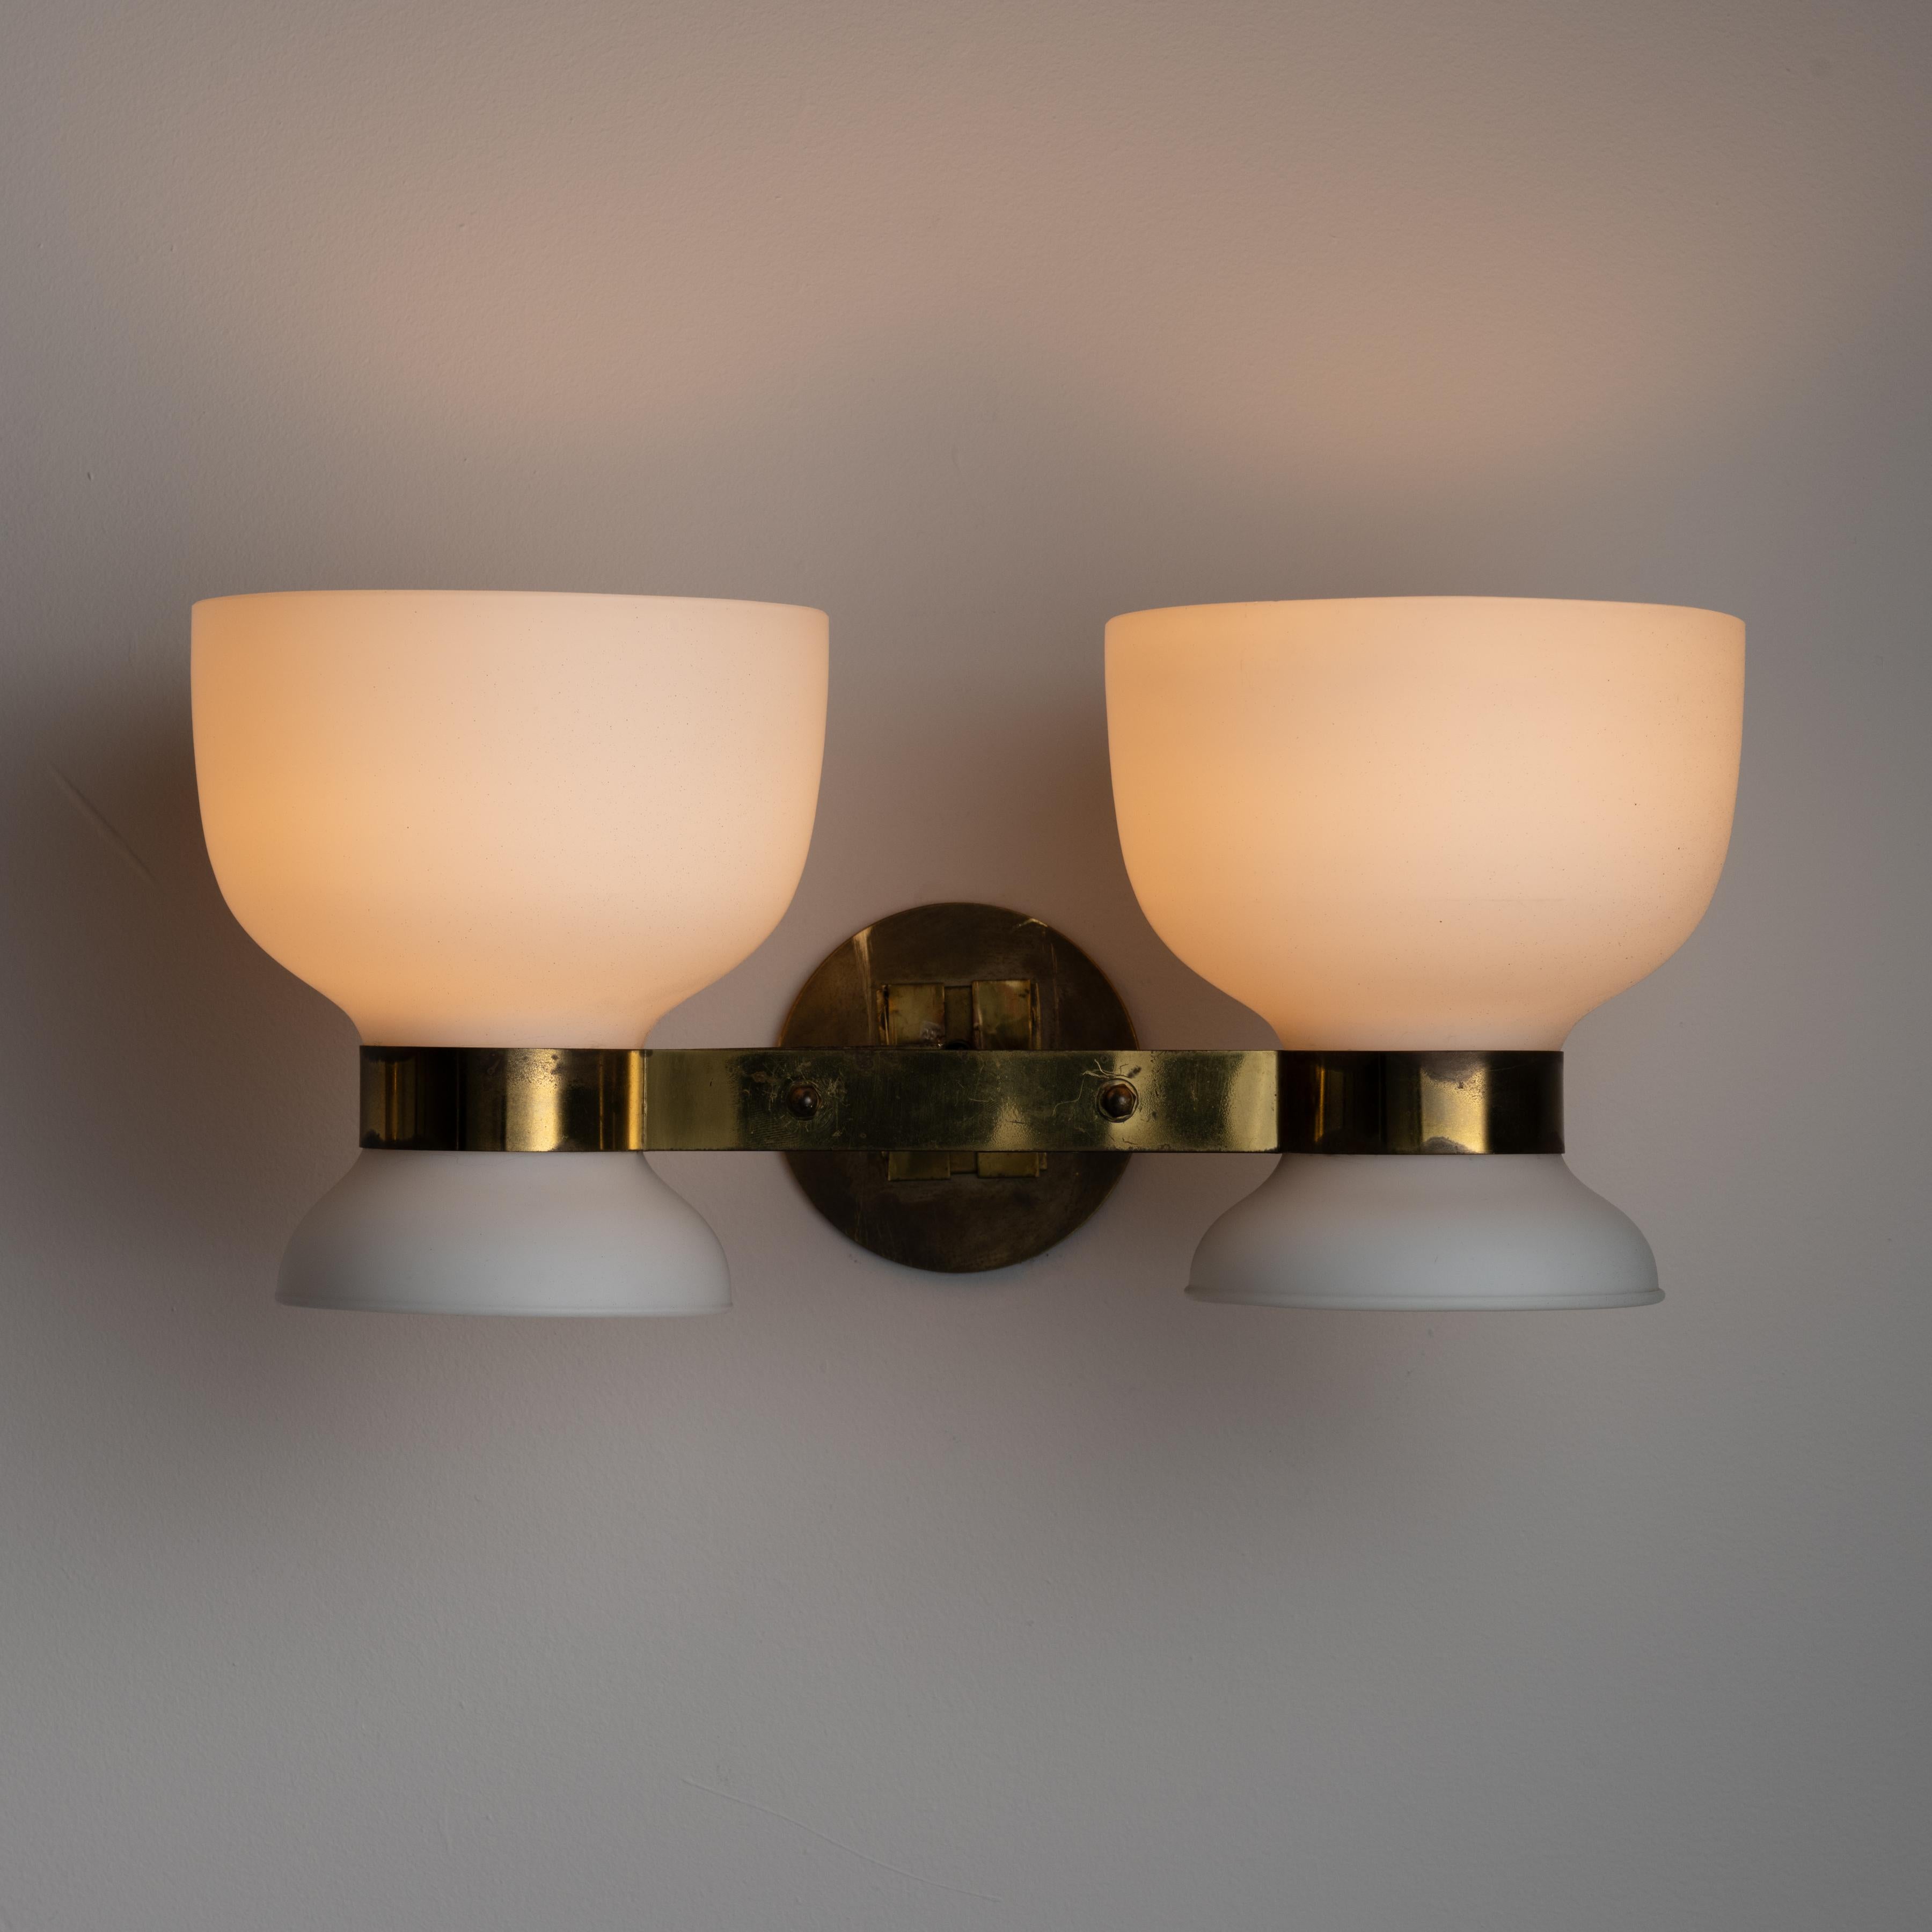 A pair of sconces by Stilnovo. Designed and manufactured in Italy, circa the 1950s. Dual opal white chalices with aged brass holders. Custom US backplate. Wired for the US. Sold as a pair.